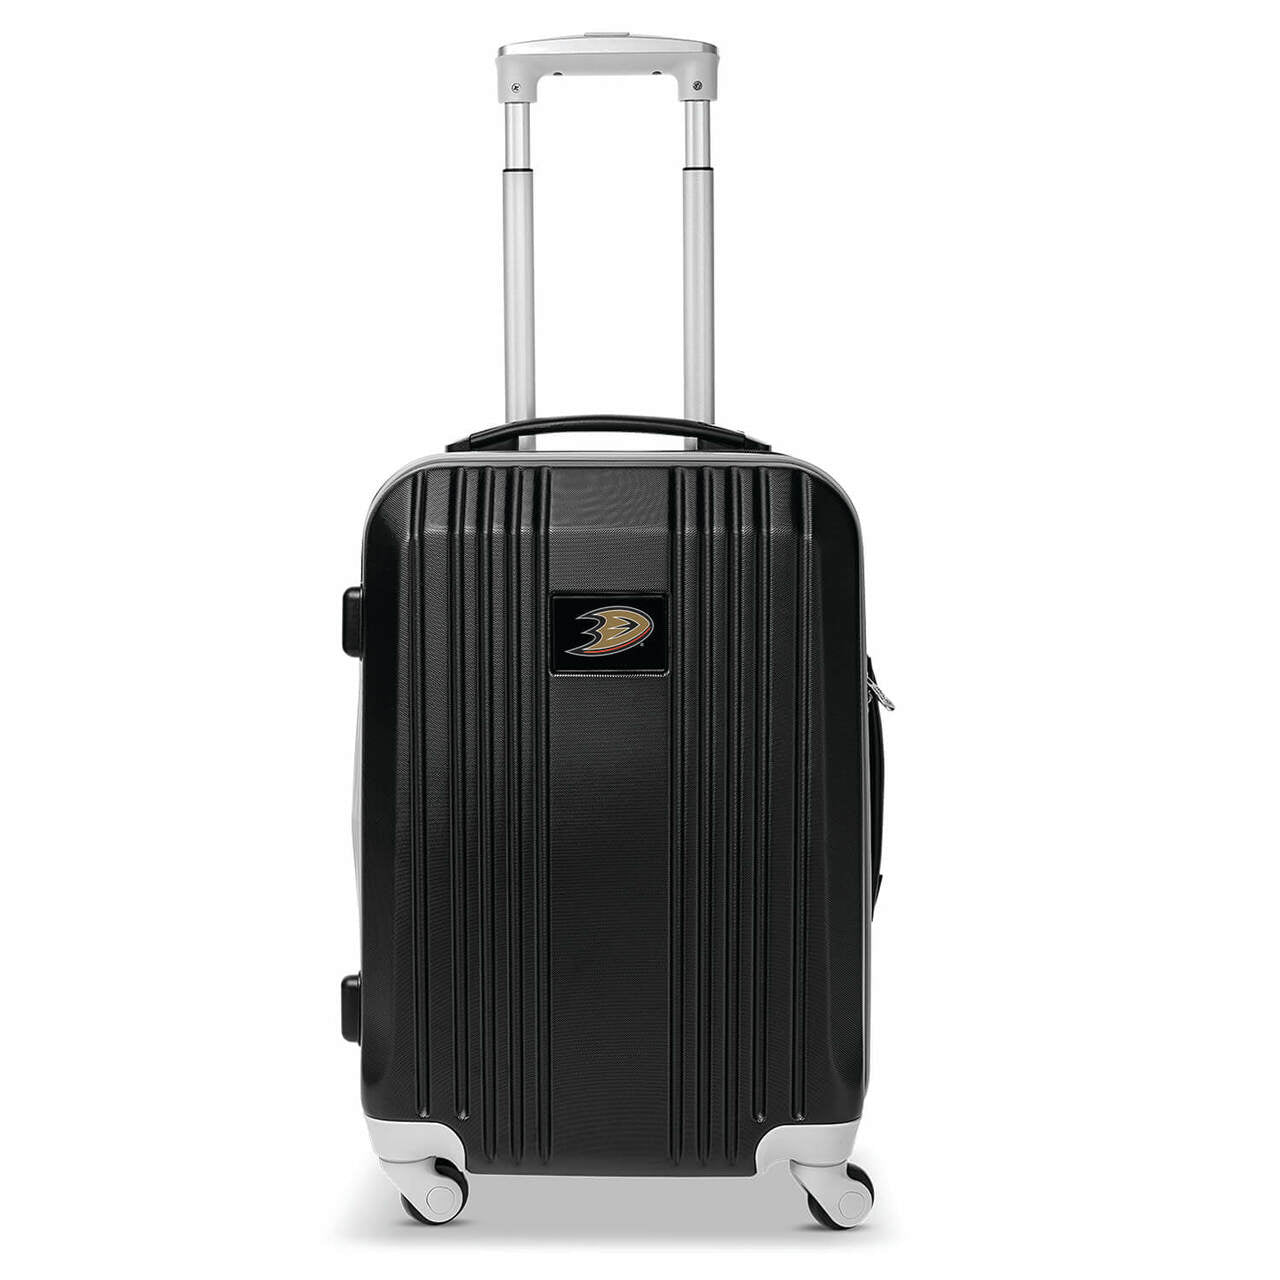 Mighty Ducks Carry On Spinner Luggage | Anaheim Mighty Ducks Hardcase Two-Tone Luggage Carry-on Spinner in Black